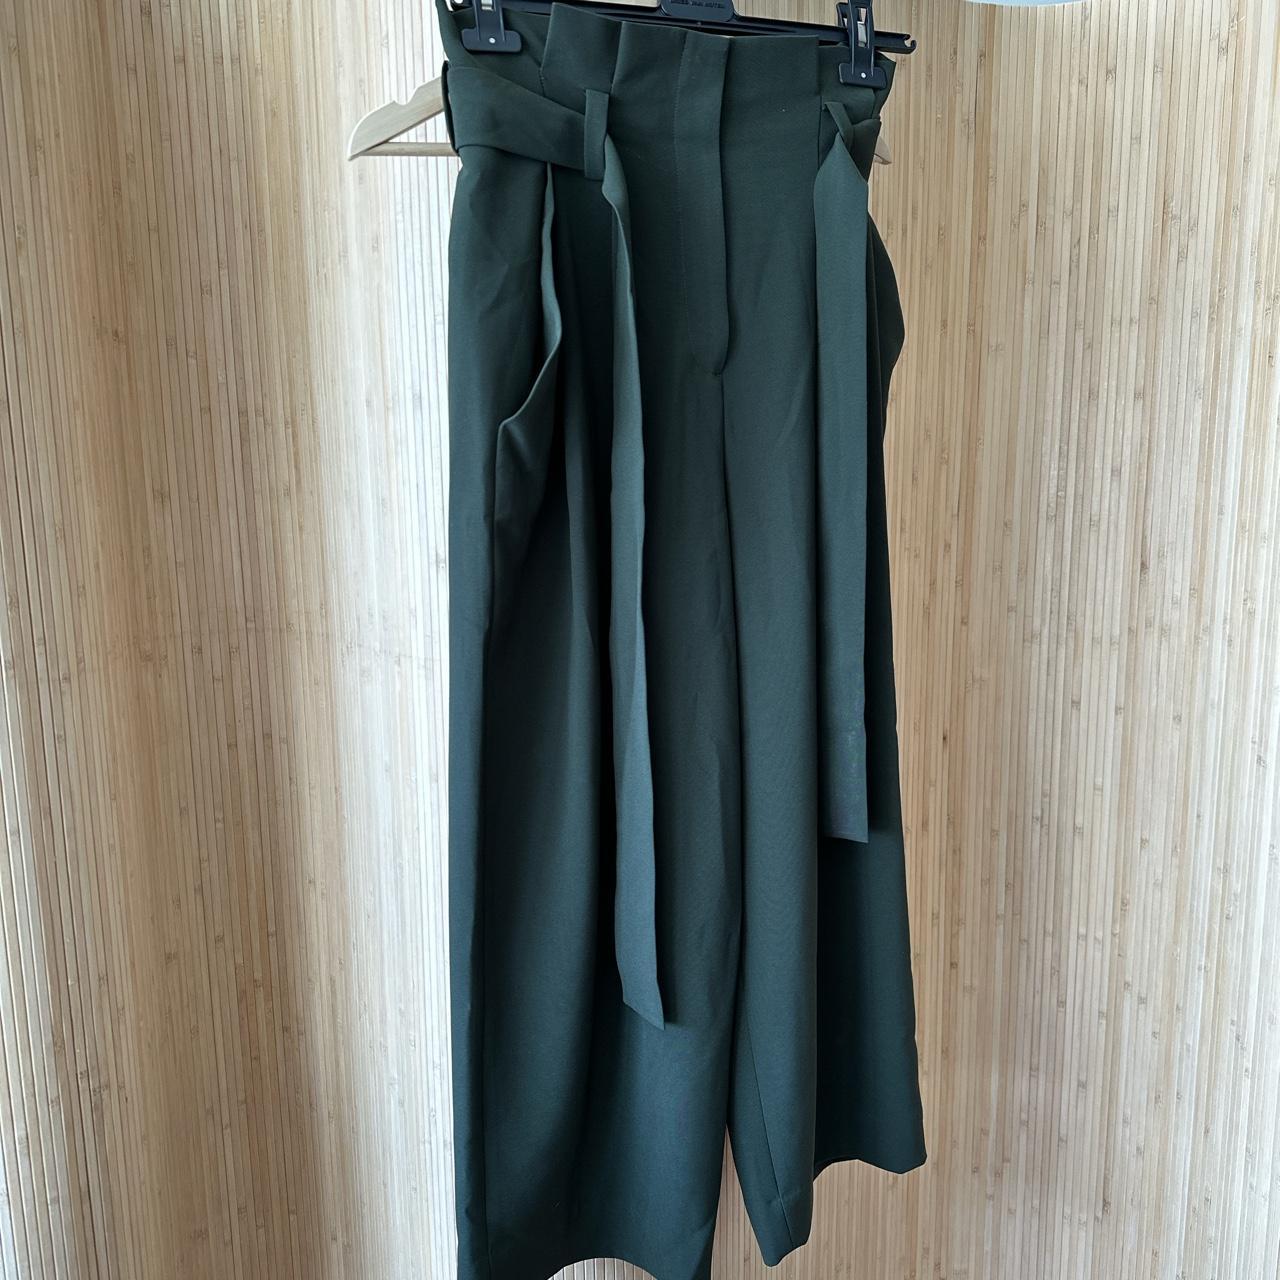 COS Women's Khaki and Green Trousers